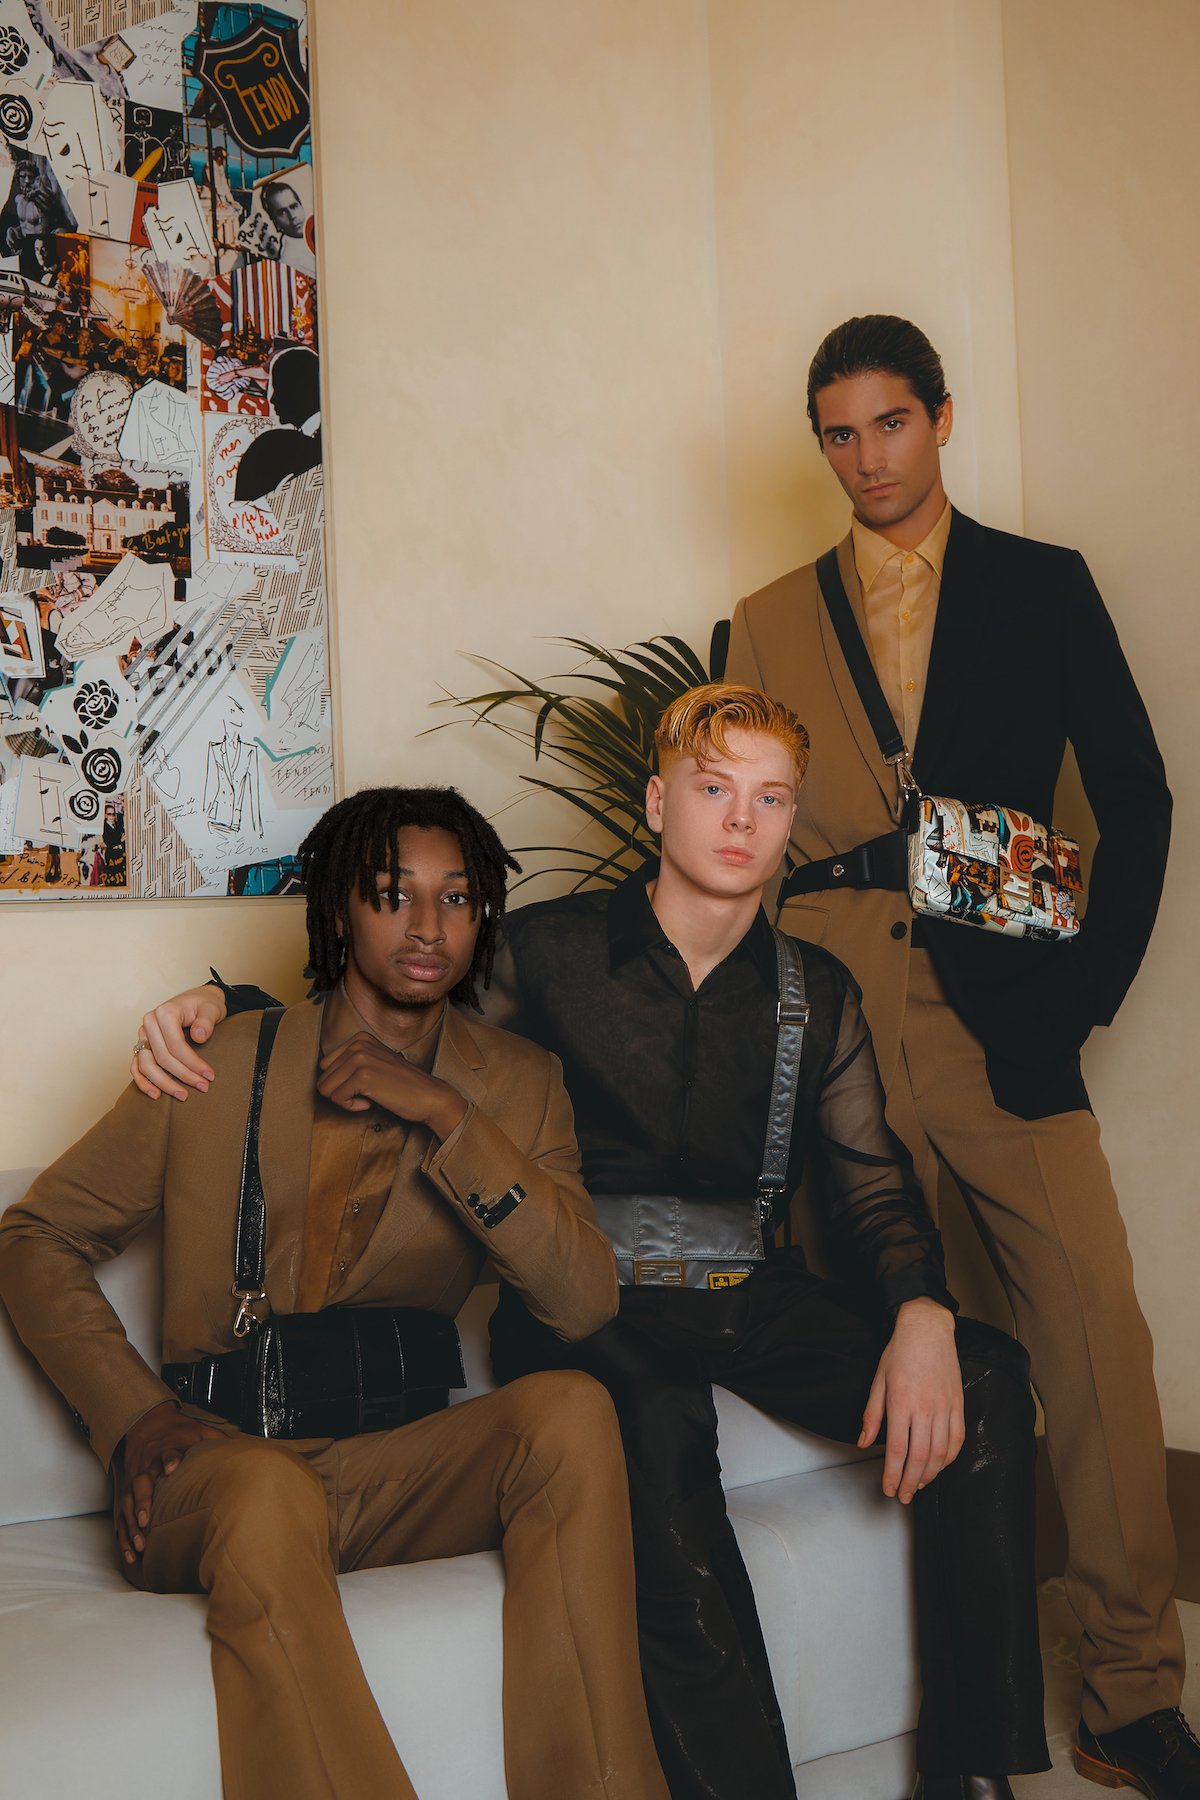 FENDI Launches New Baguette Bag and Campaign Featuring Leo Mandella, Marc Forne + Nasir Dean